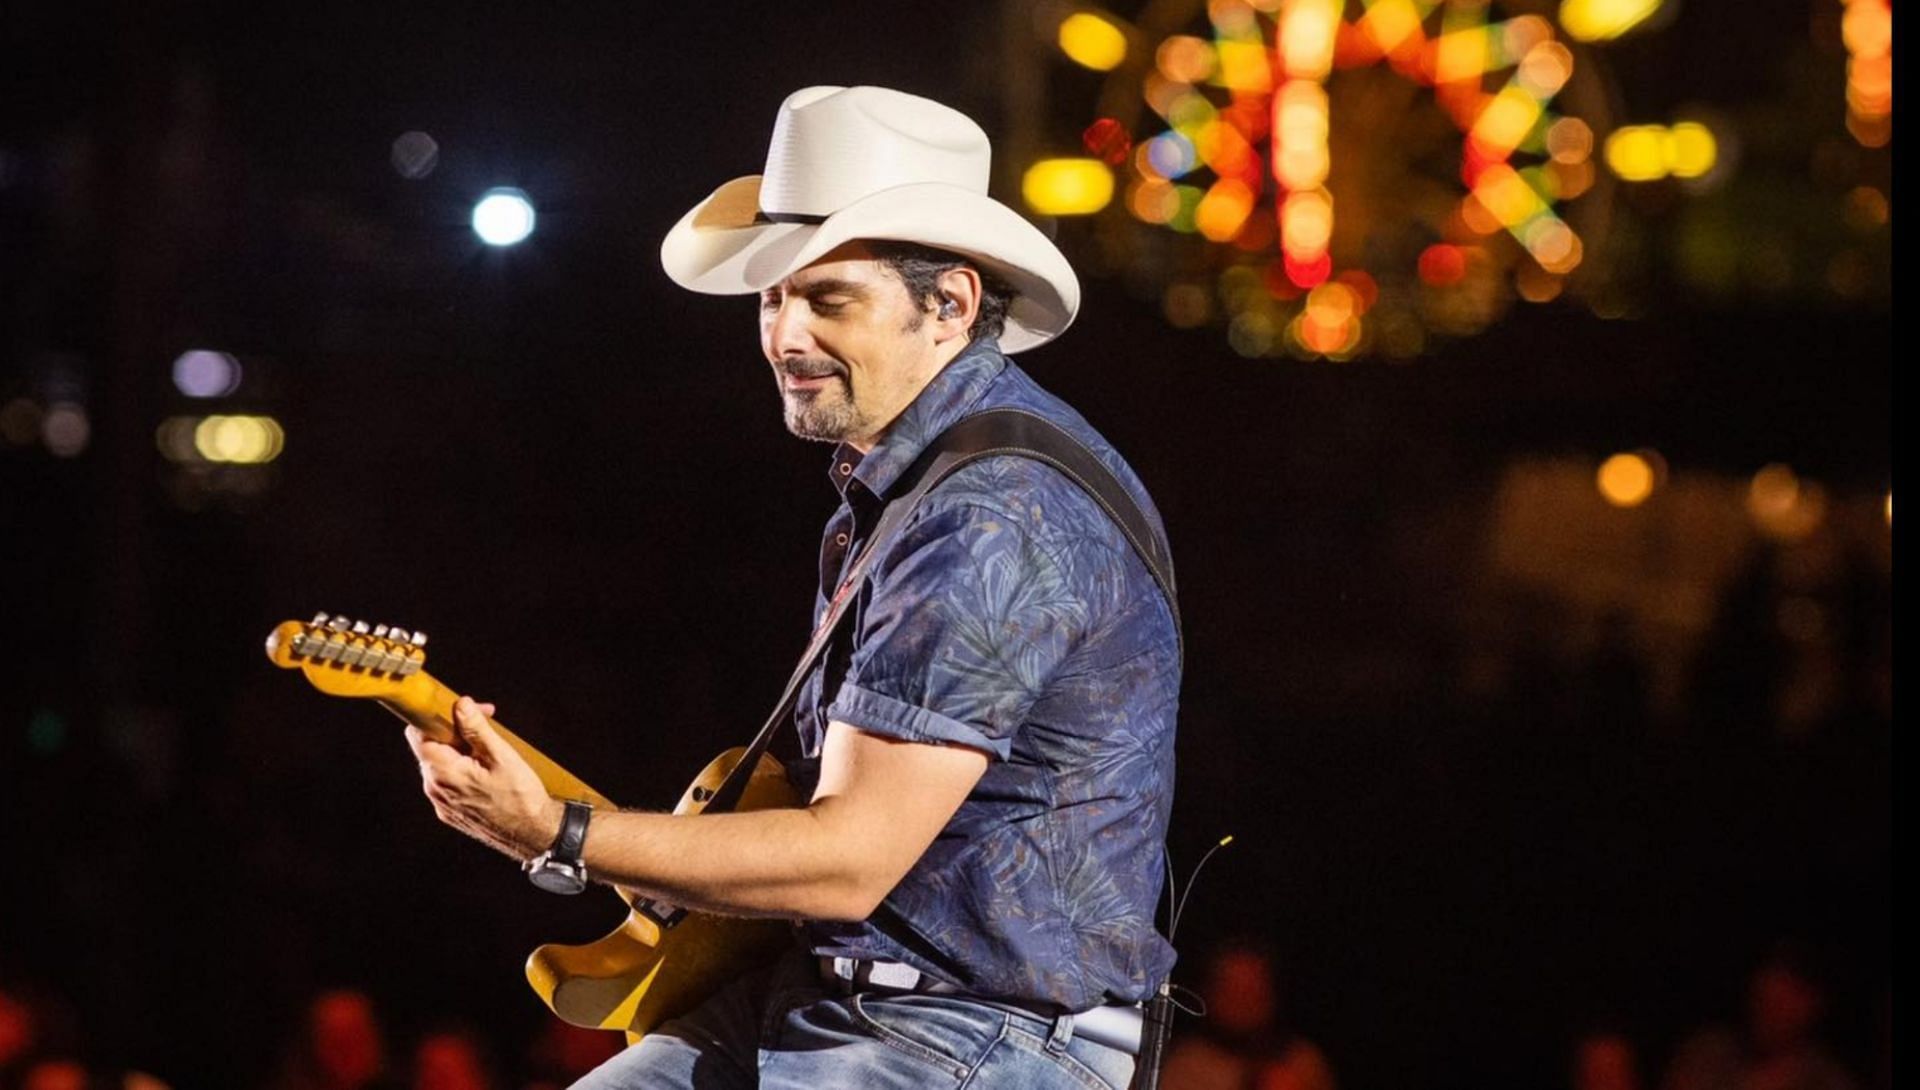 Brad Paisley Tour 2022 tickets Where to buy, price, dates, and more